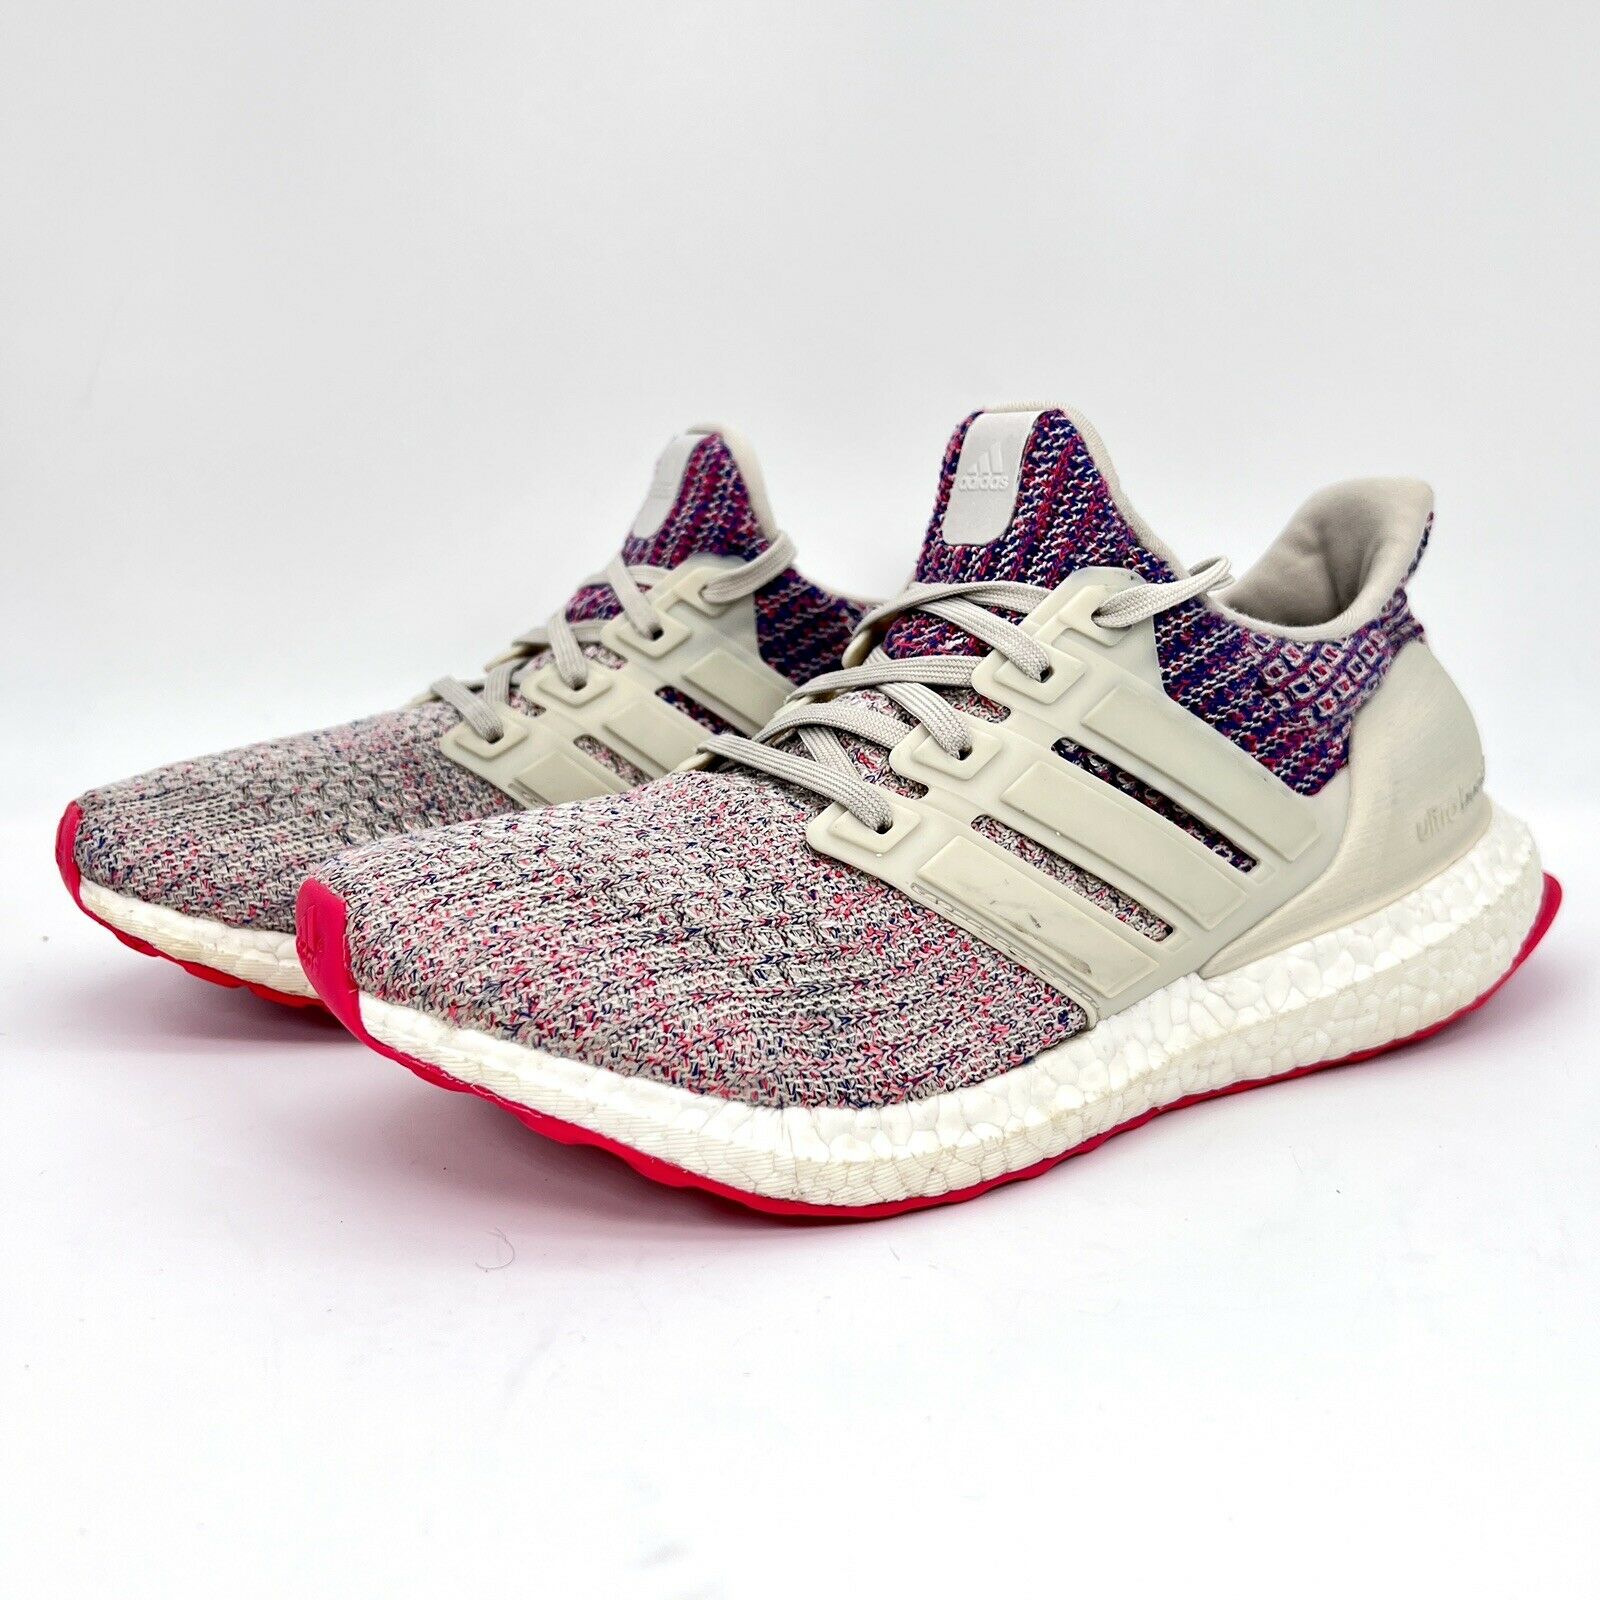 Adidas Ultraboost 4.0 F36122 Bliss Red Blue Sneakers Shoes Womens Size 6.5